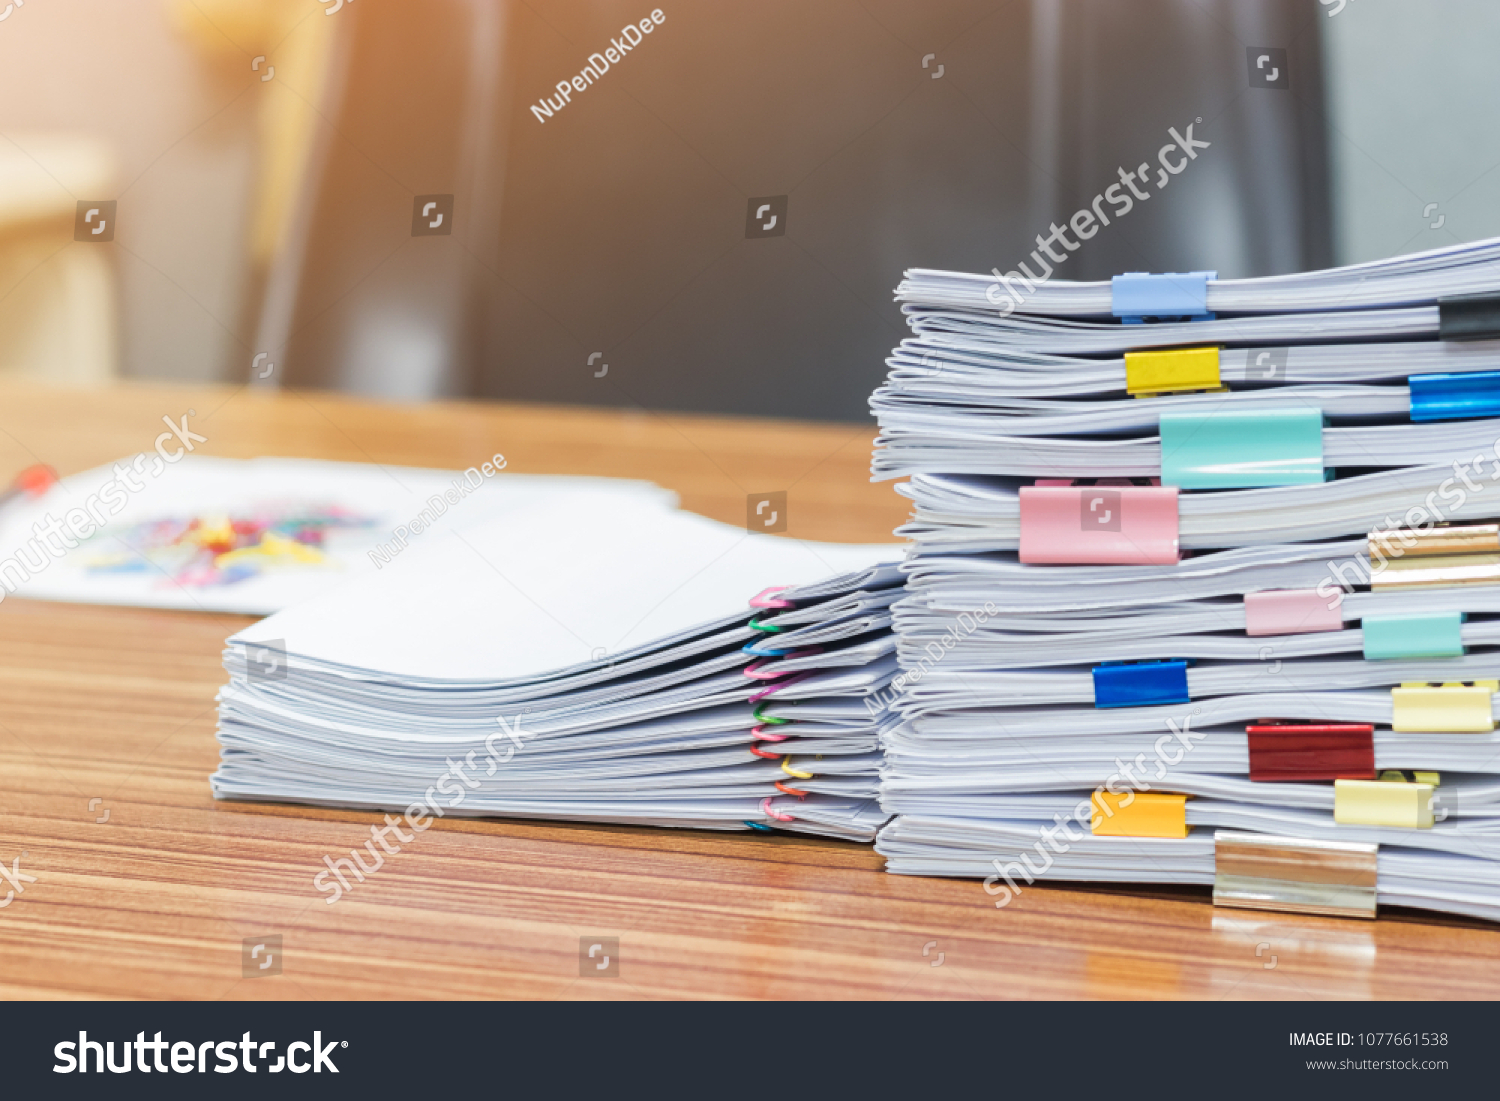 Stack of student's homework that assigned to students to be completed outside class on teacher's desk separated by colored paper clips. Document stacks arranged by various colored paper clips on desk. #1077661538